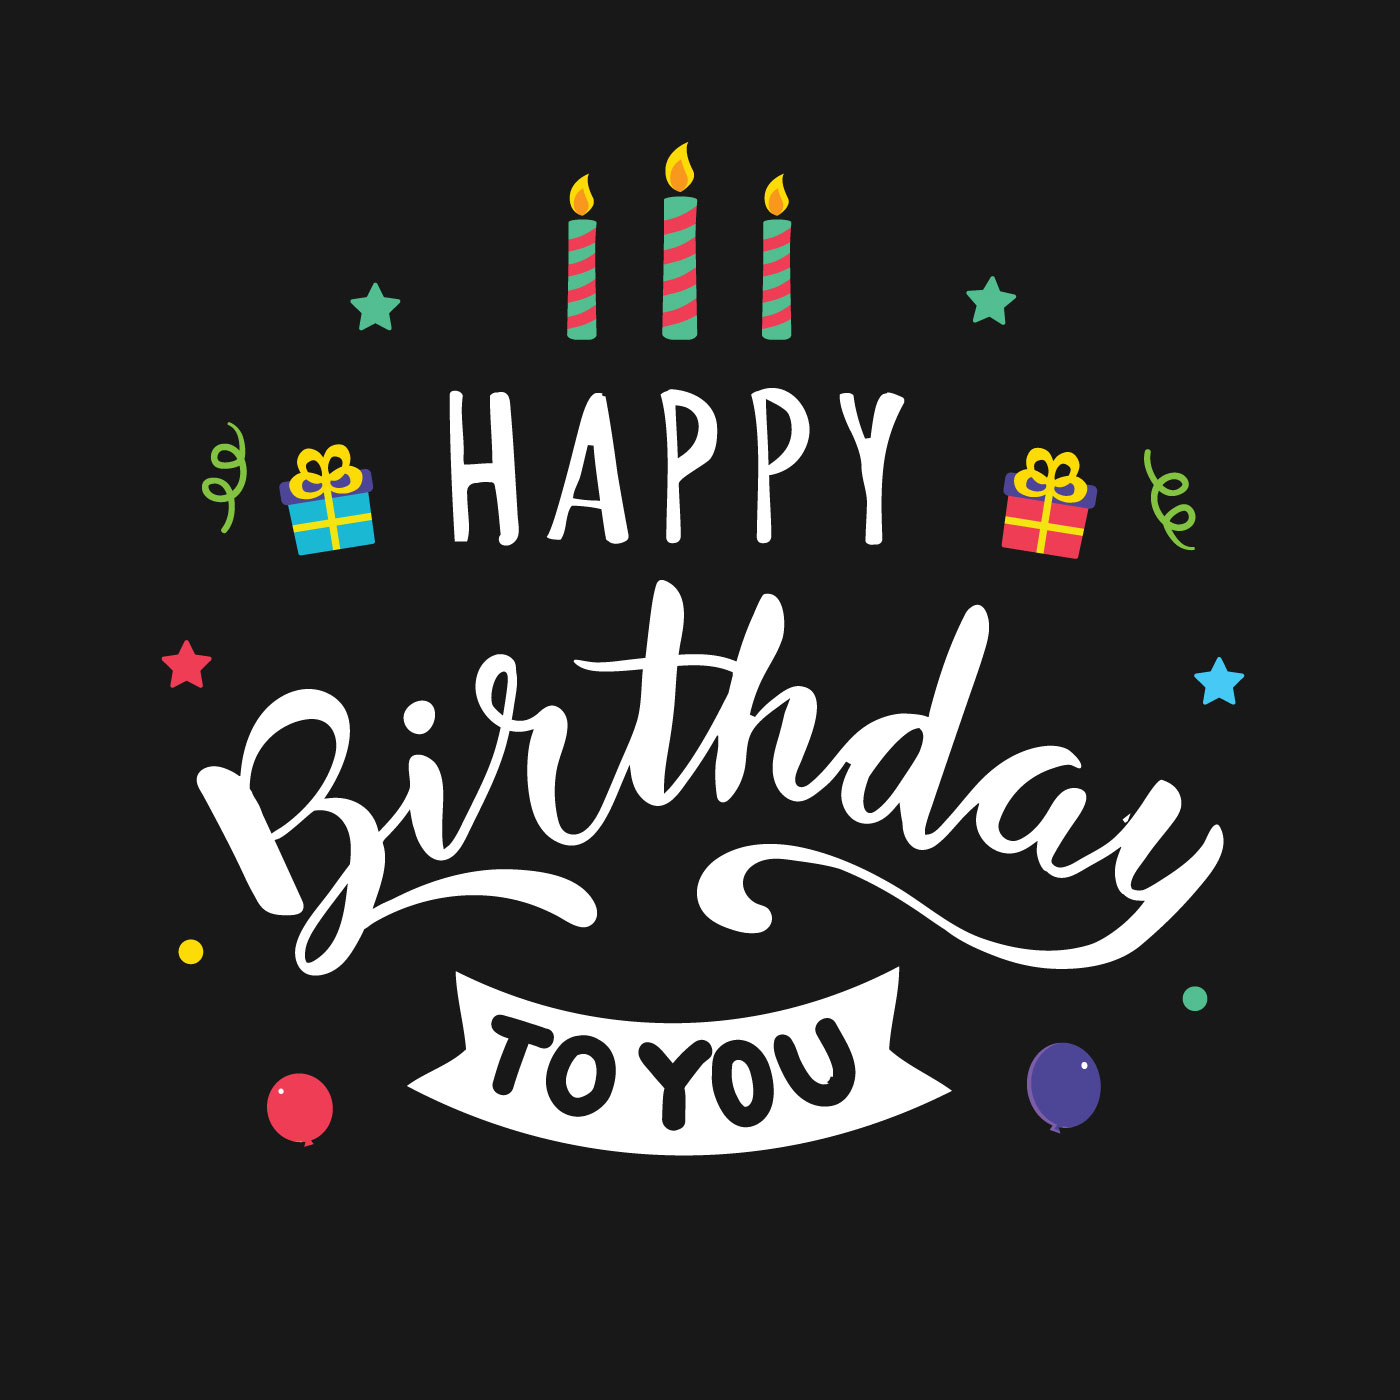 Download Happy Birthday Typography for Greeting Card - Download ...